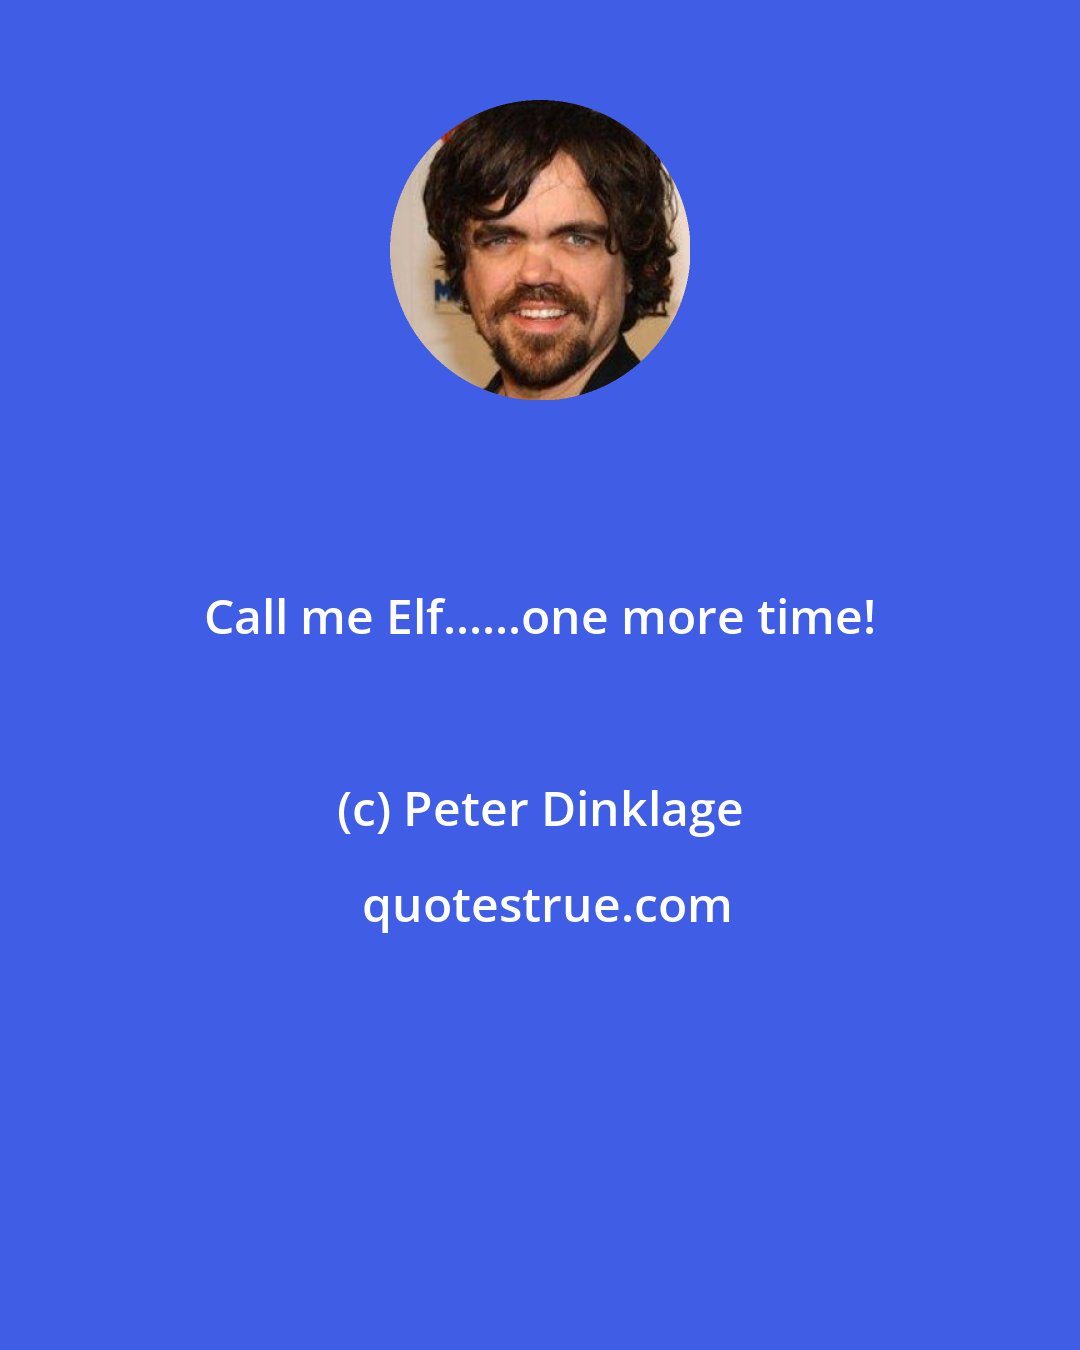 Peter Dinklage: Call me Elf......one more time!